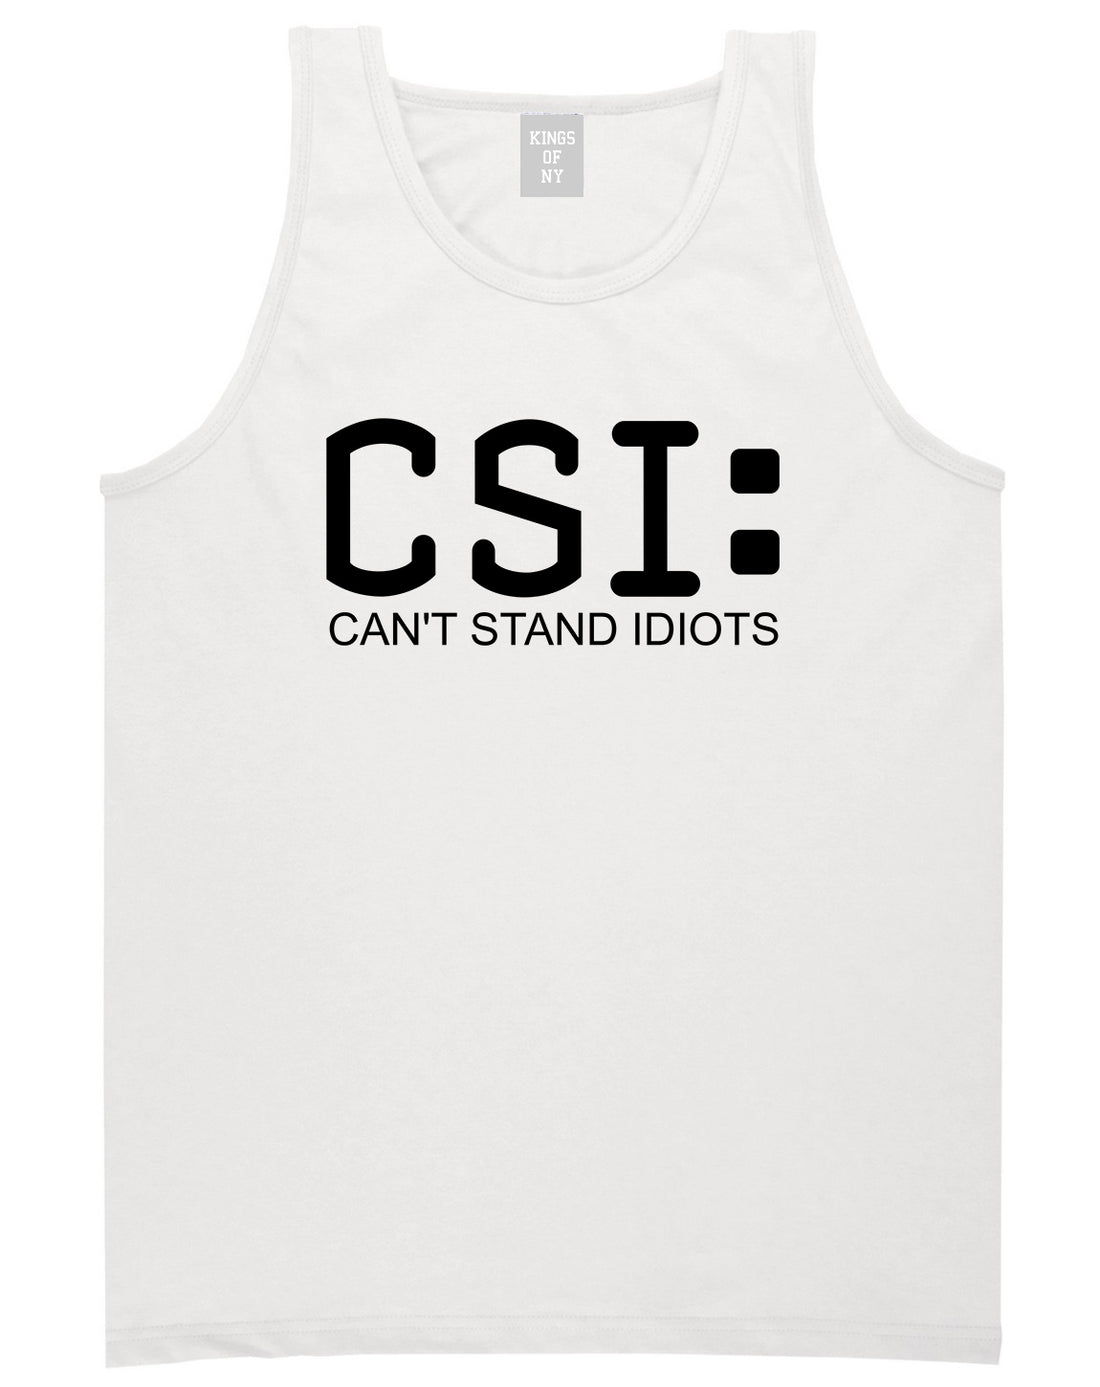 CSI Cant Stand Idiots Funny TV Humor Mens Tank Top T-Shirt White